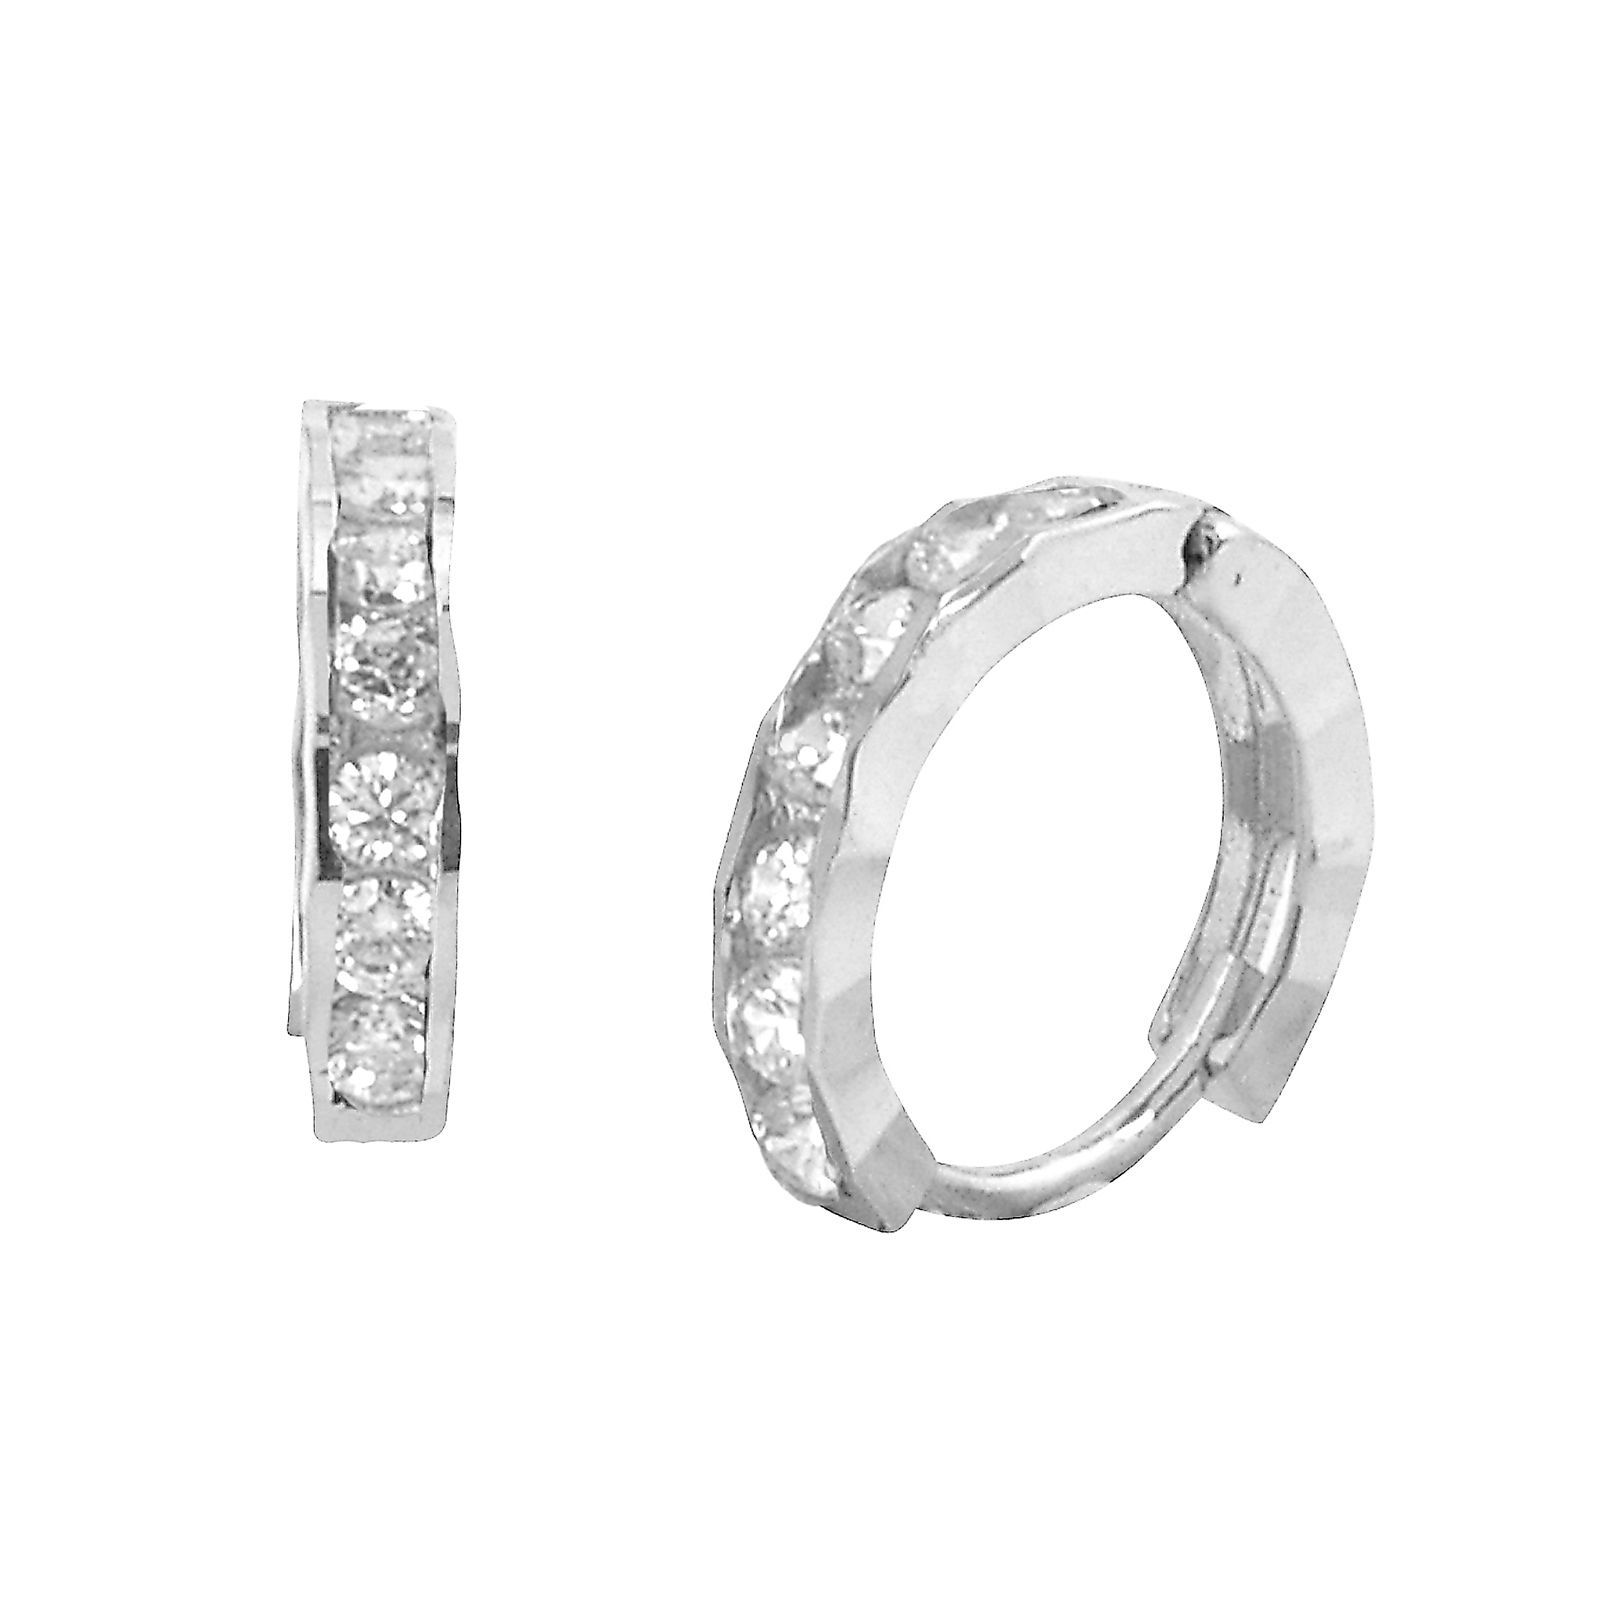 Primary image for Sterling Silver Hoop Earrings 1 Row Cubic Zirconia Fancy Setting 13mm x 3mm